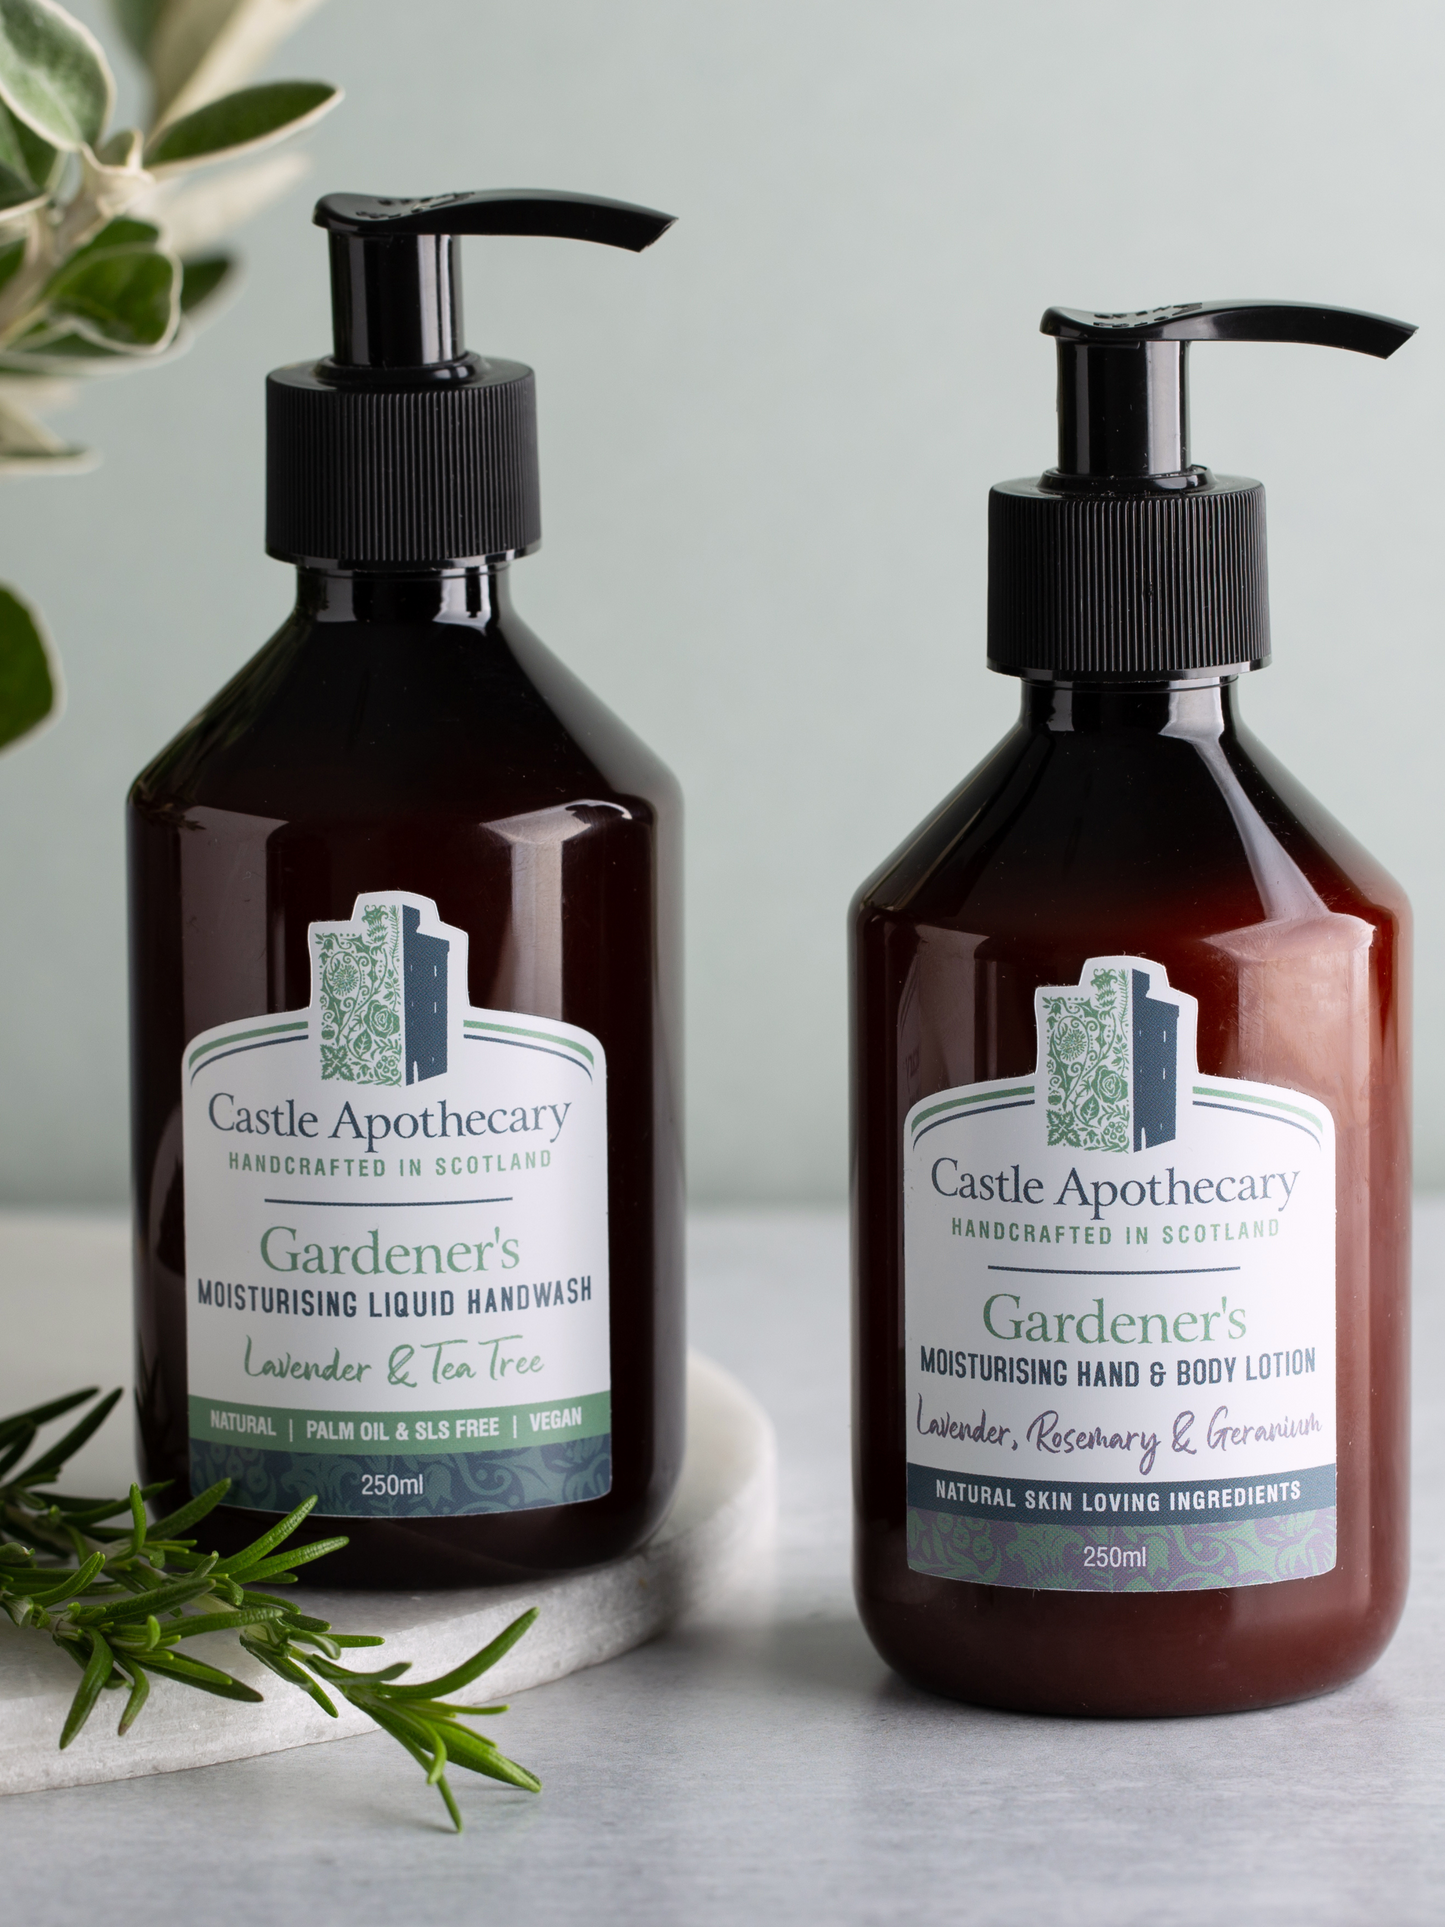 Scottish natural skincare gift set made in Scotland.  Liquid soap with Scottish Sea Salt  and Moisturising Hand & Body Lotion with British ingredients of English Lavender, English Rosemary and Rose Geranium